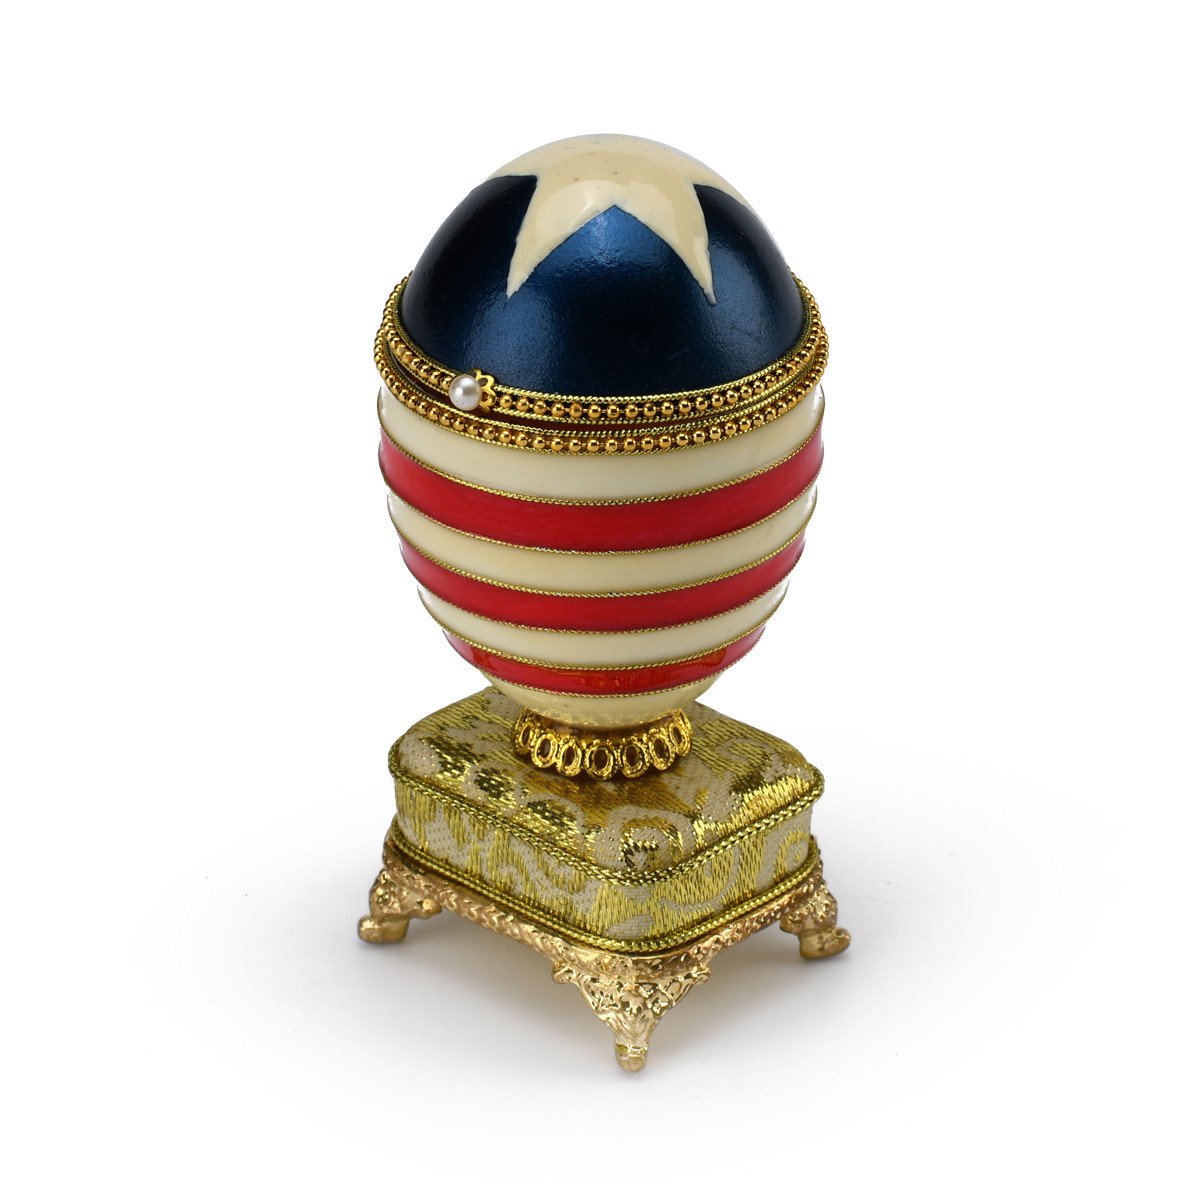 Image of Patriotic Handcrafted Musical Goose Egg American Theme with Decorative Star